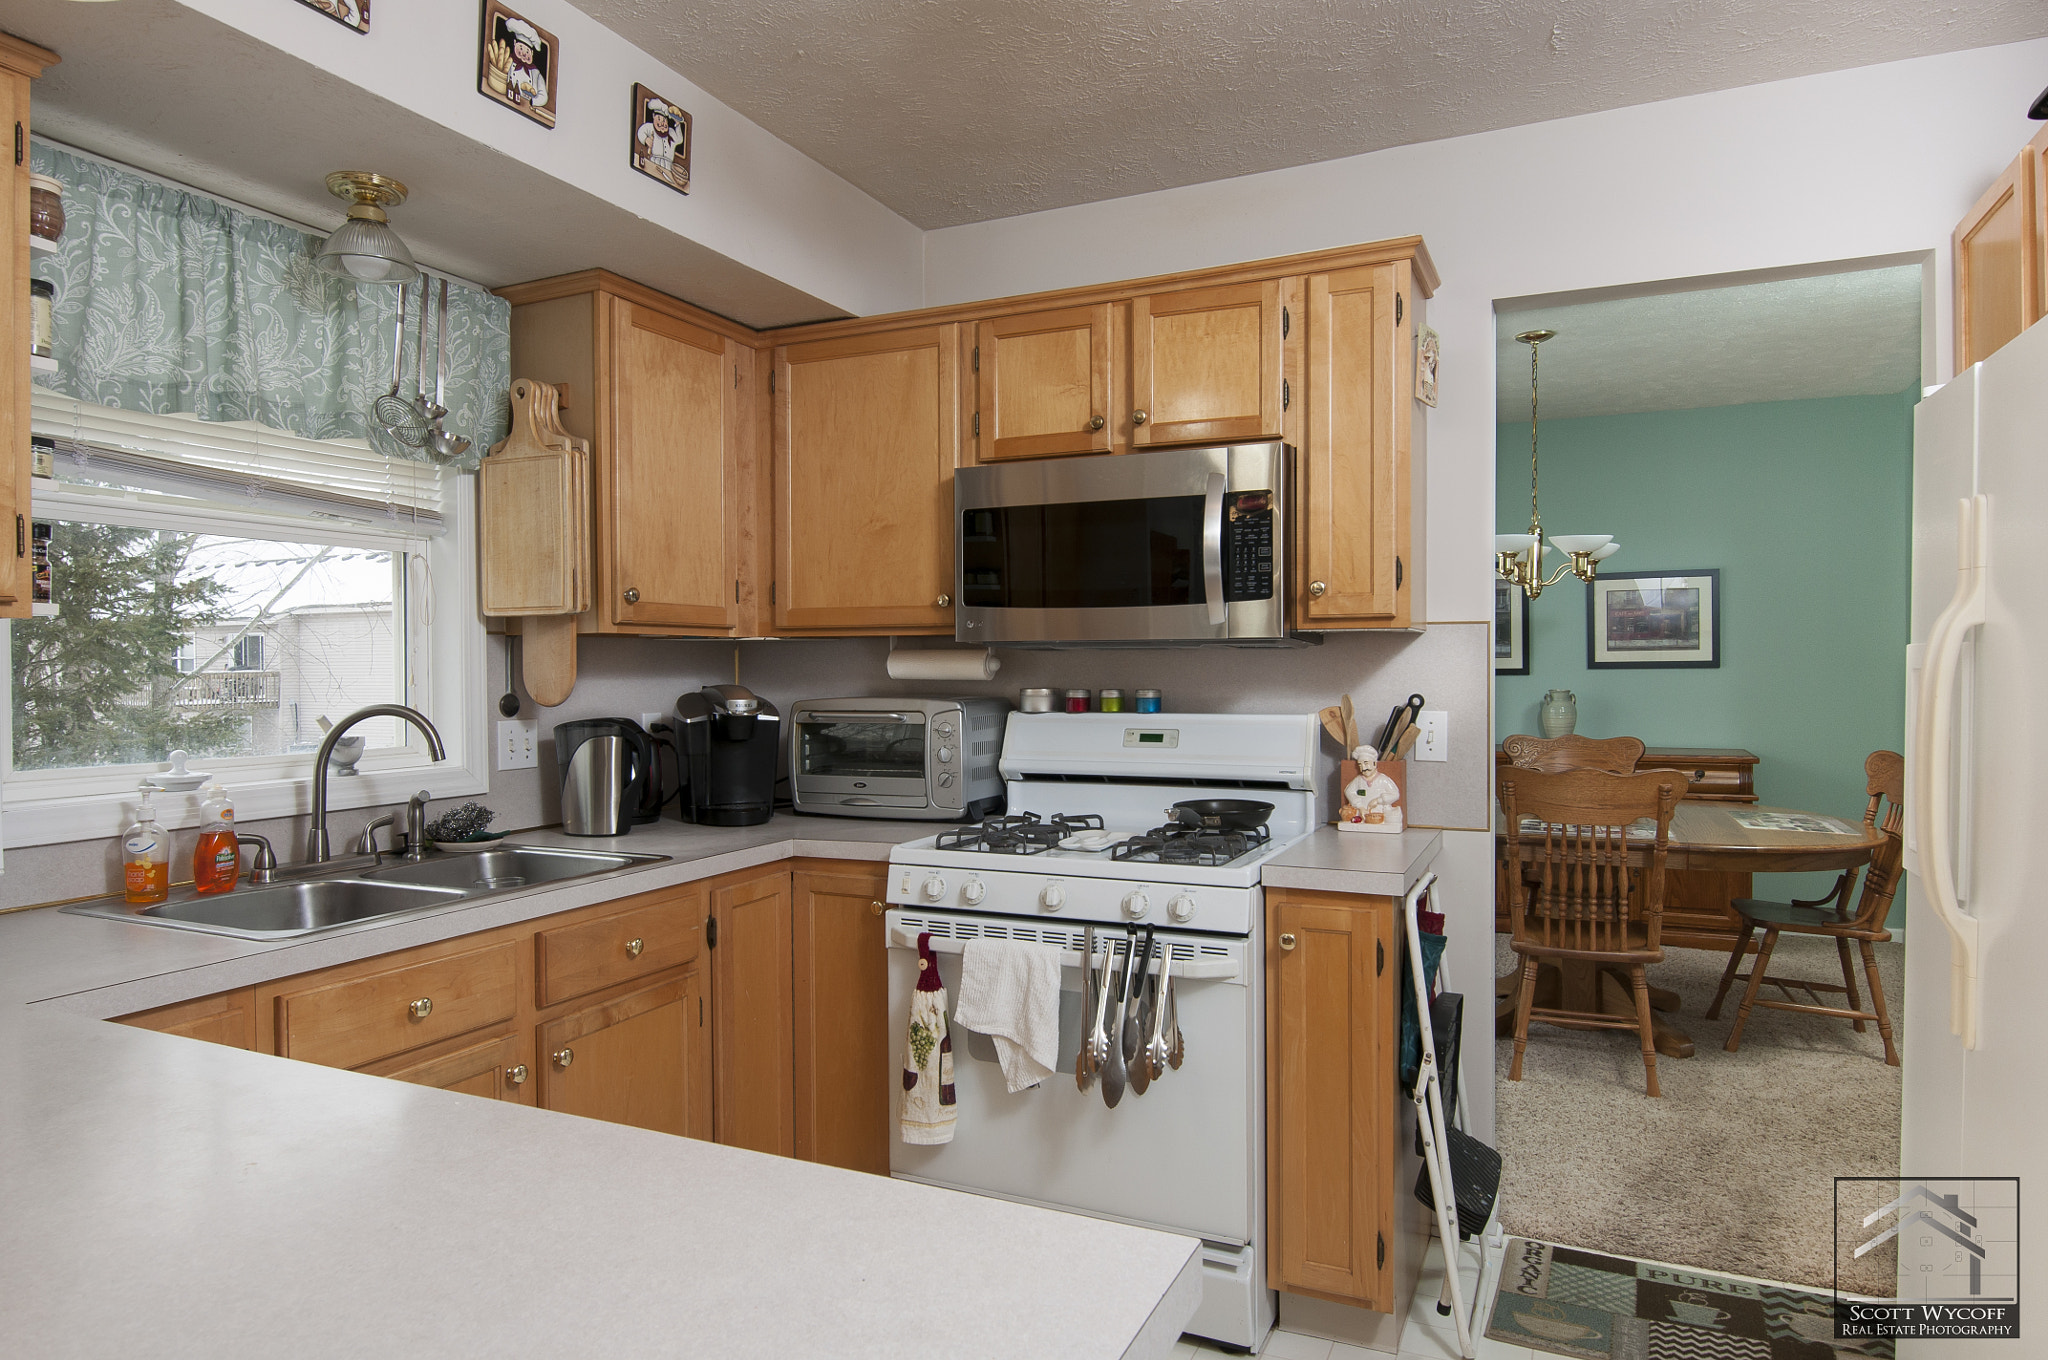 Nikon D5000 + Tokina AT-X 11-20 F2.8 PRO DX (AF 11-20mm f/2.8) sample photo. Kitchen 1 comstock home photography